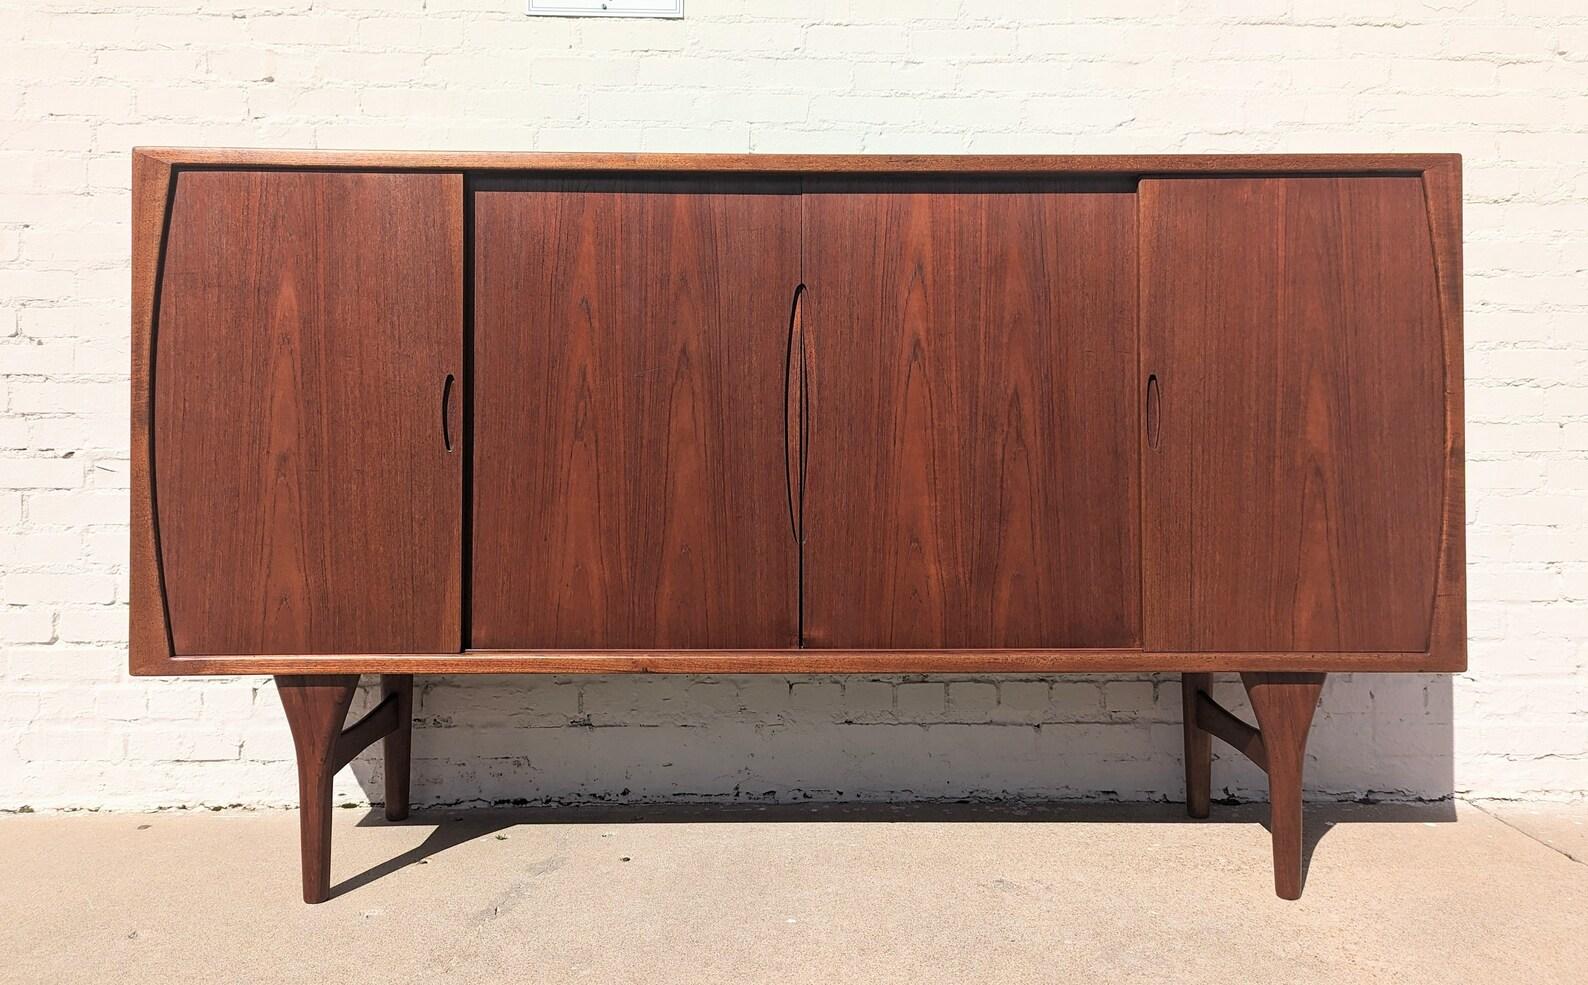 Mid Century Danish Modern Cocktail Cabinet for Bruno Hansen
 
Above average vintage condition and structurally sound. Has some expected slight finish wear and scratching. Top, trim and doors have been refinished but still have some scratching and